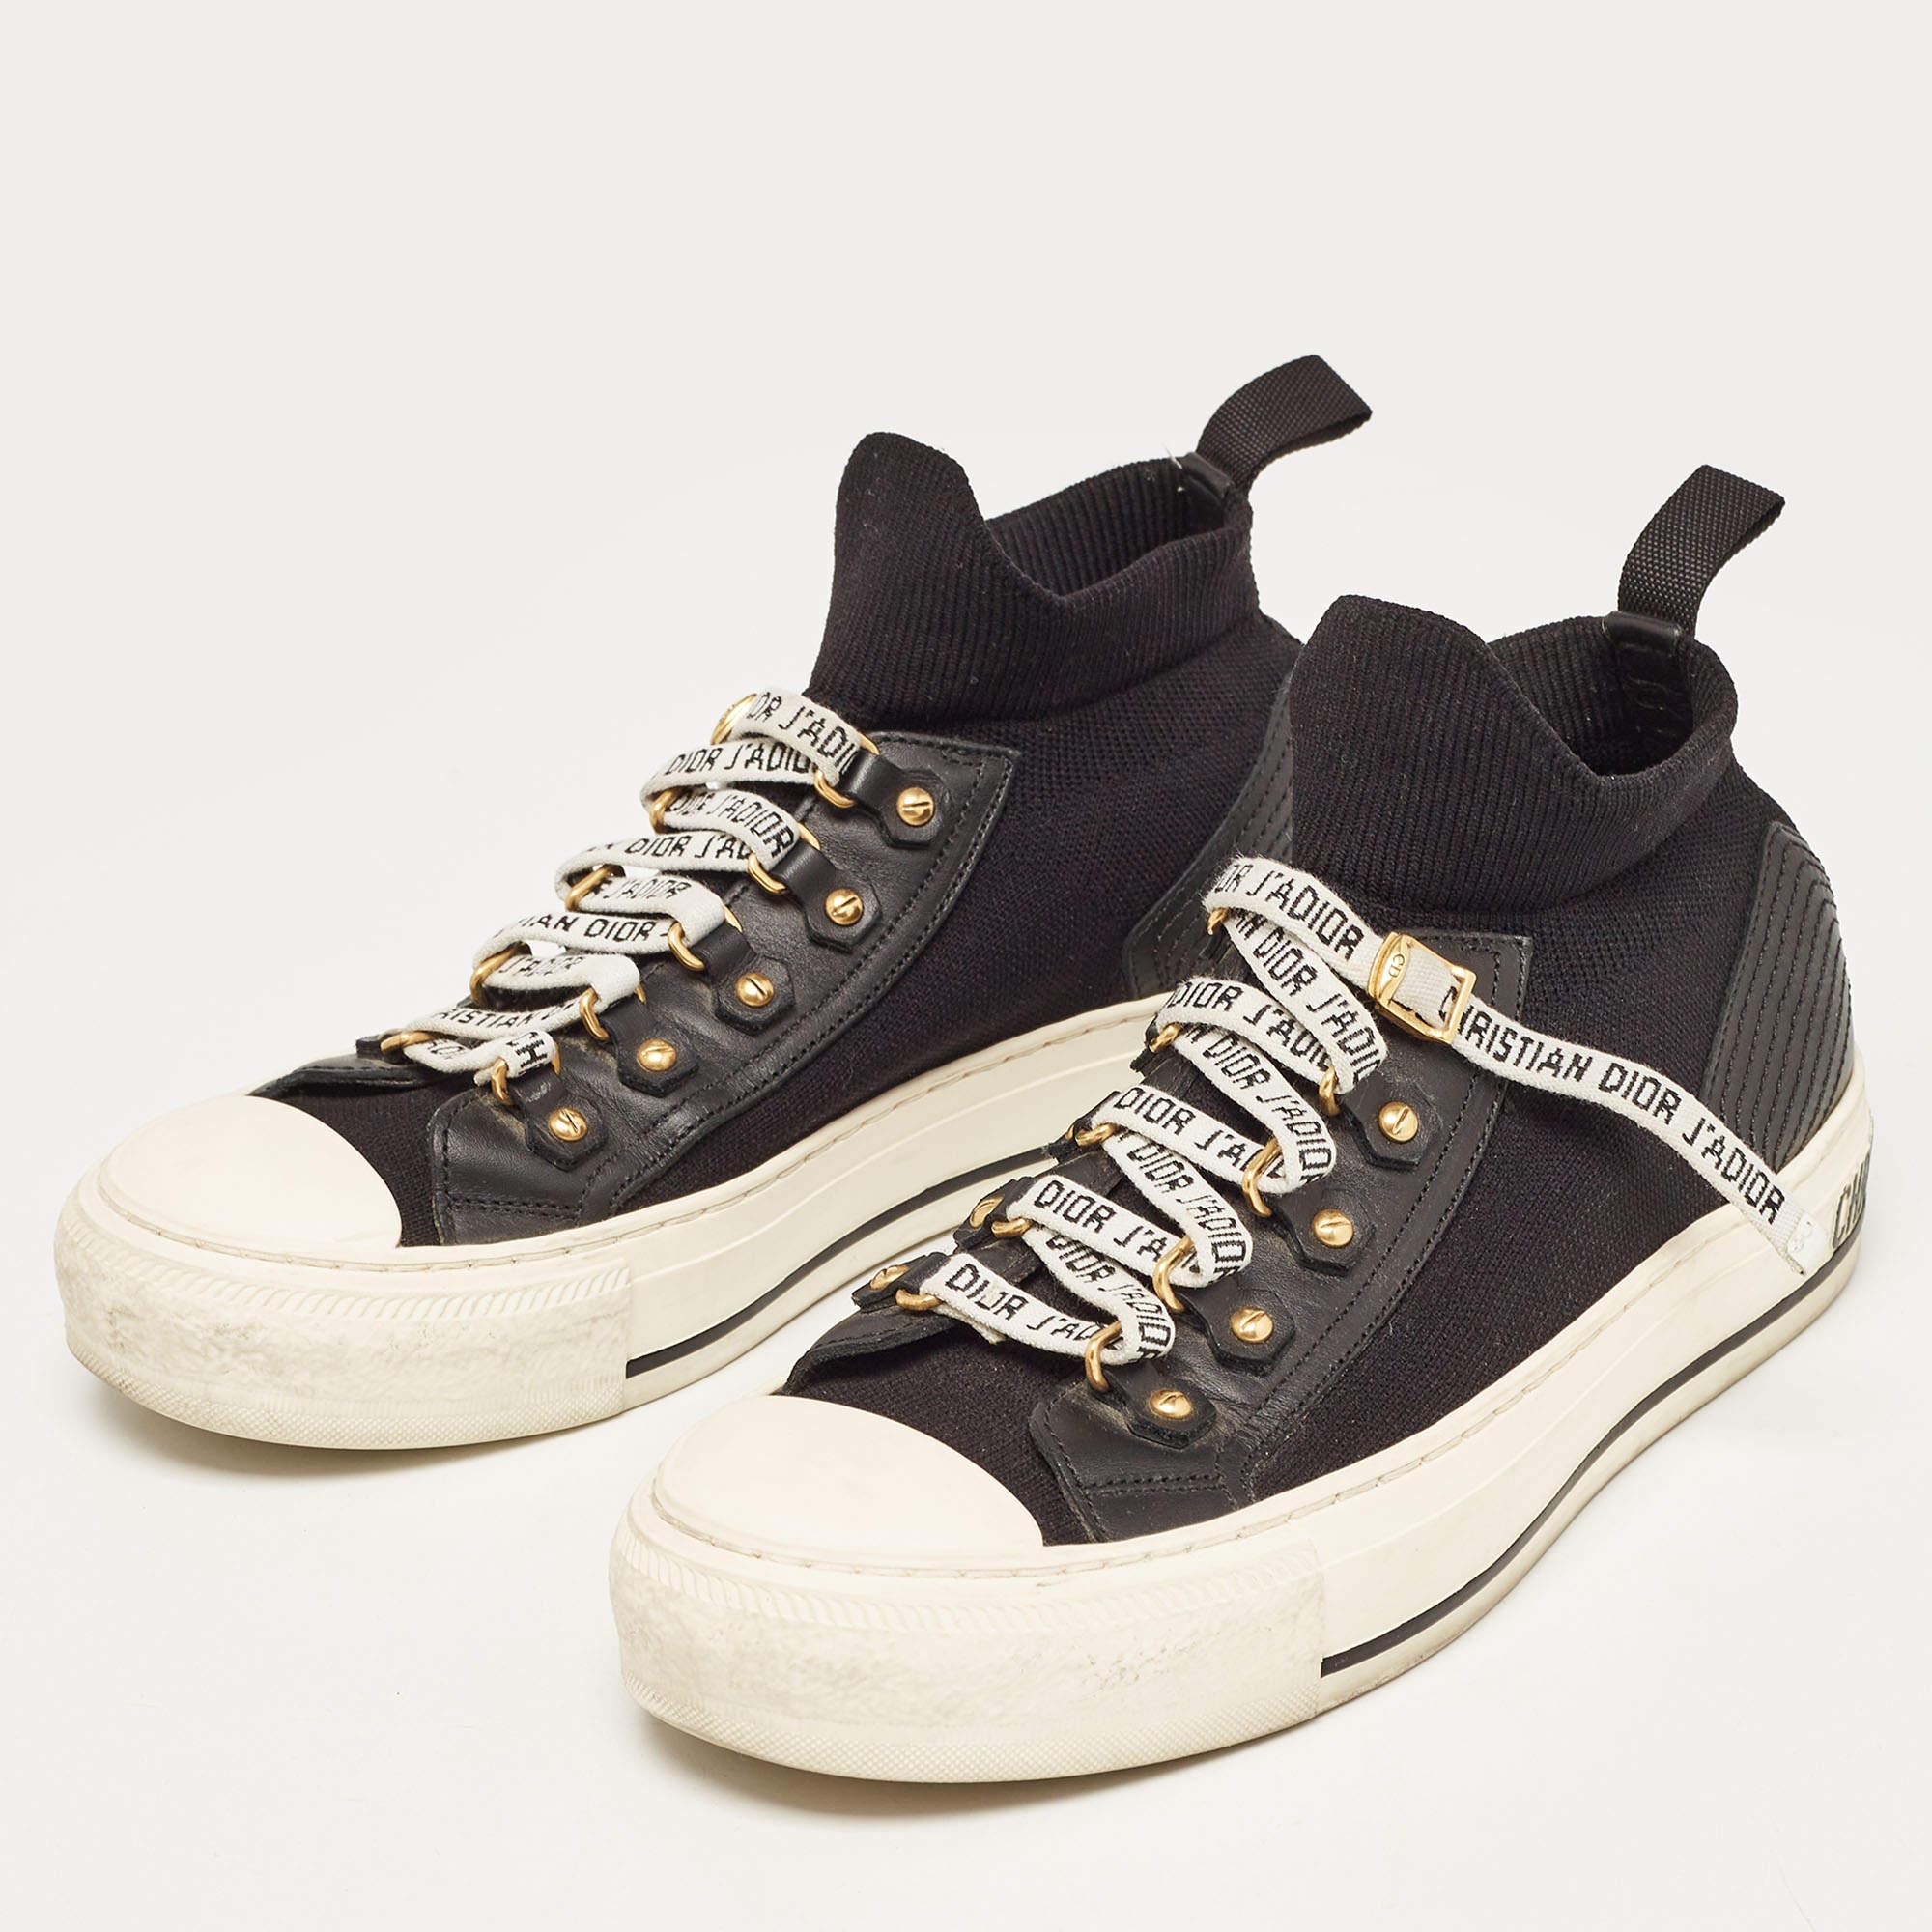 Dior Black Fabric and Leather Walk'n'Dior High Top Sneakers Size 36 en vente 2